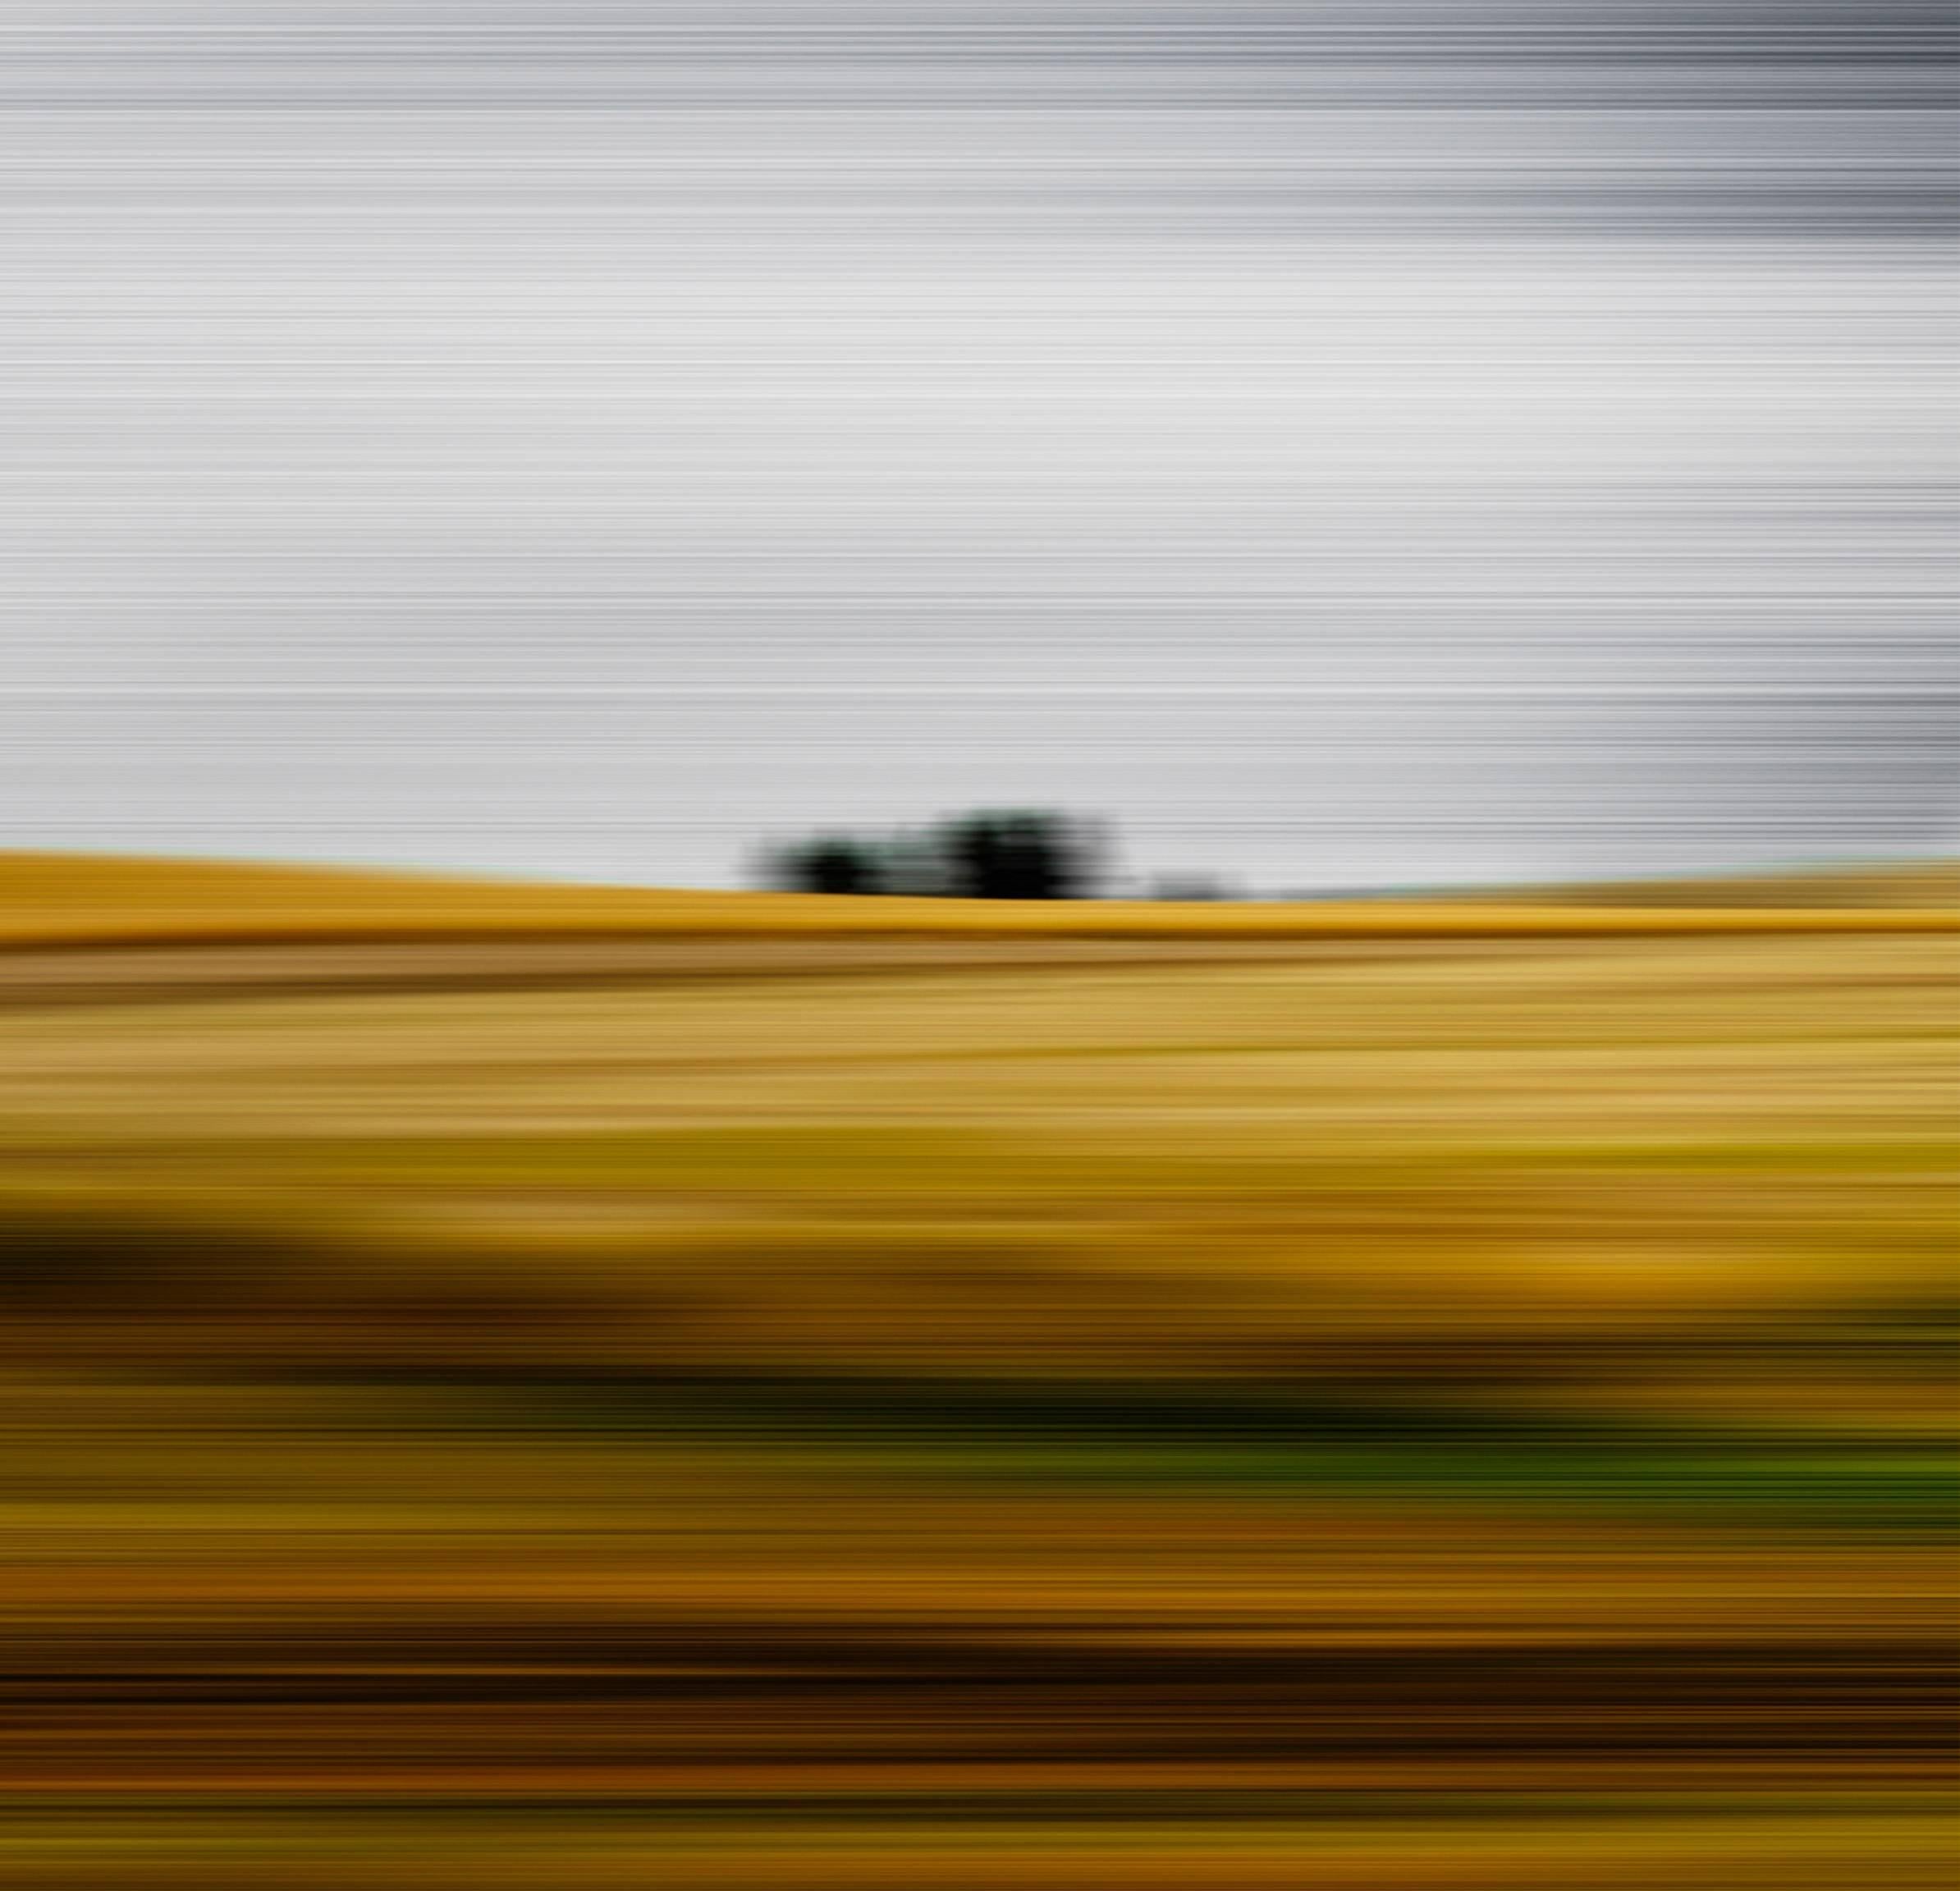 Fields of Wheat - Photograph by Etienne Labbe